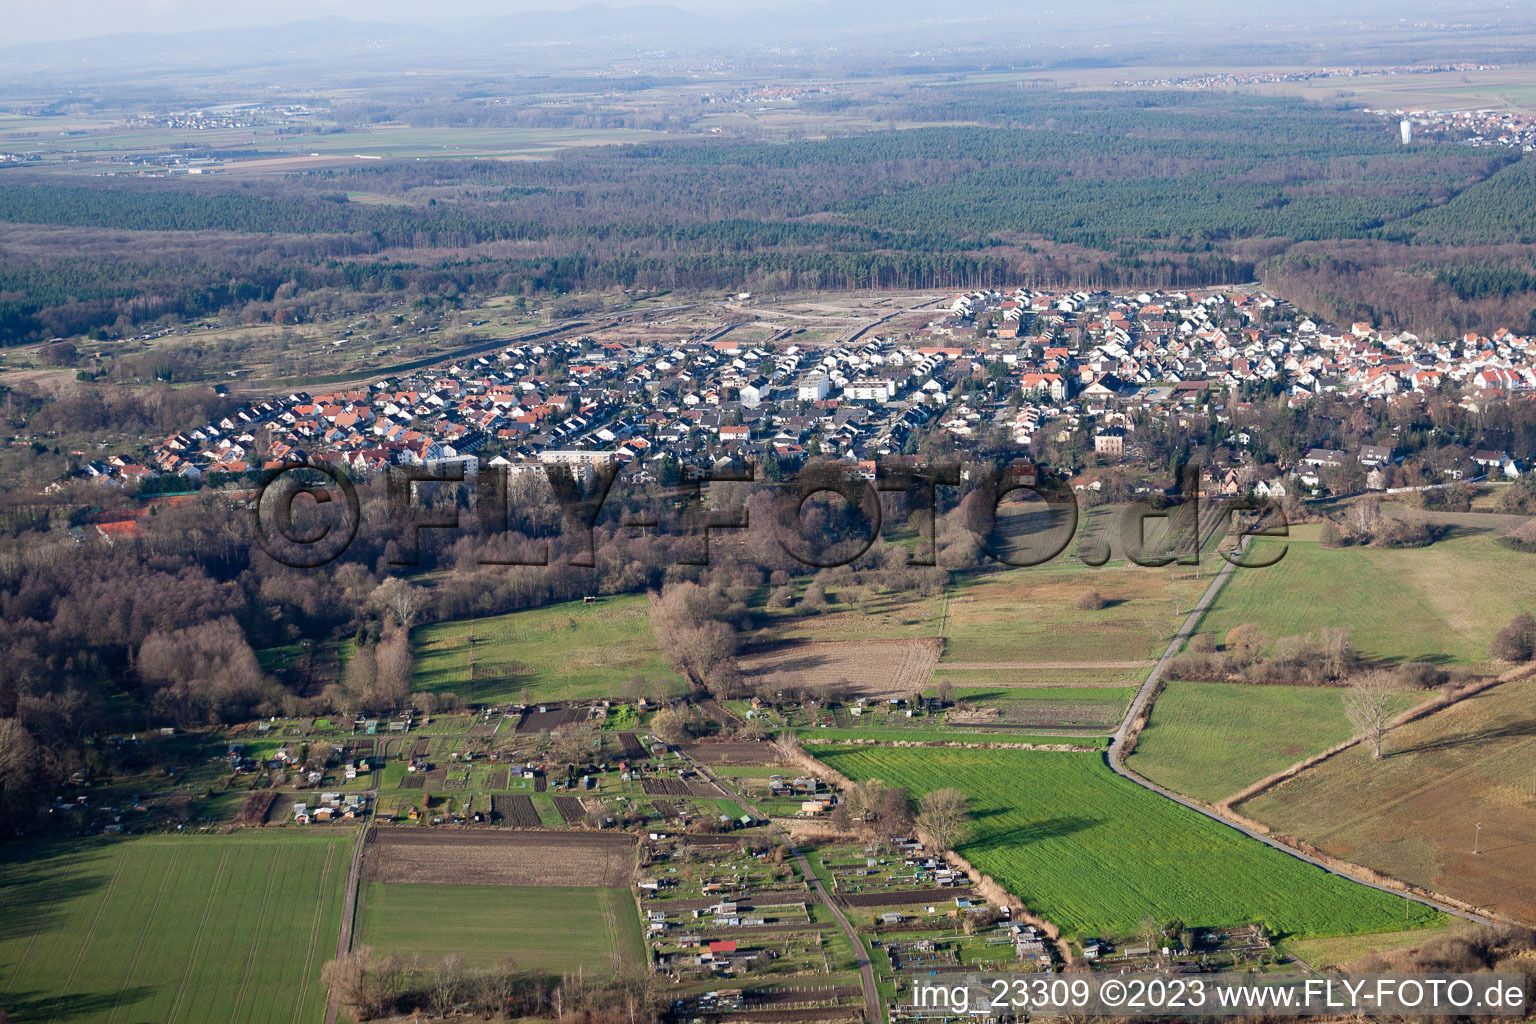 Jockgrim in the state Rhineland-Palatinate, Germany from the drone perspective